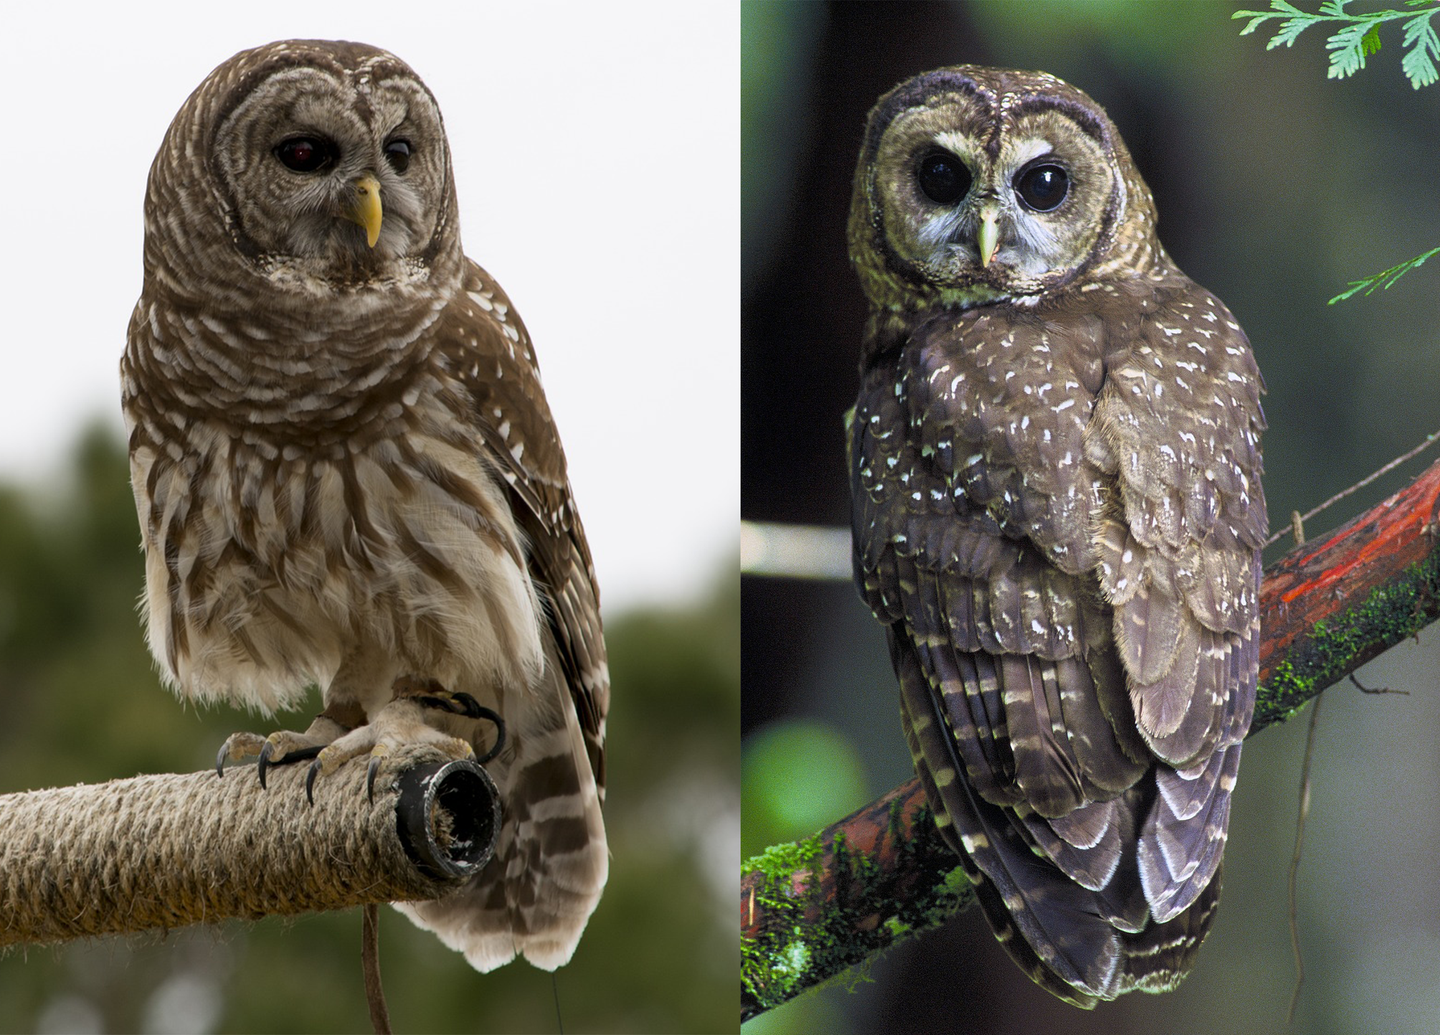 barred owl vs spotted owl side by side.